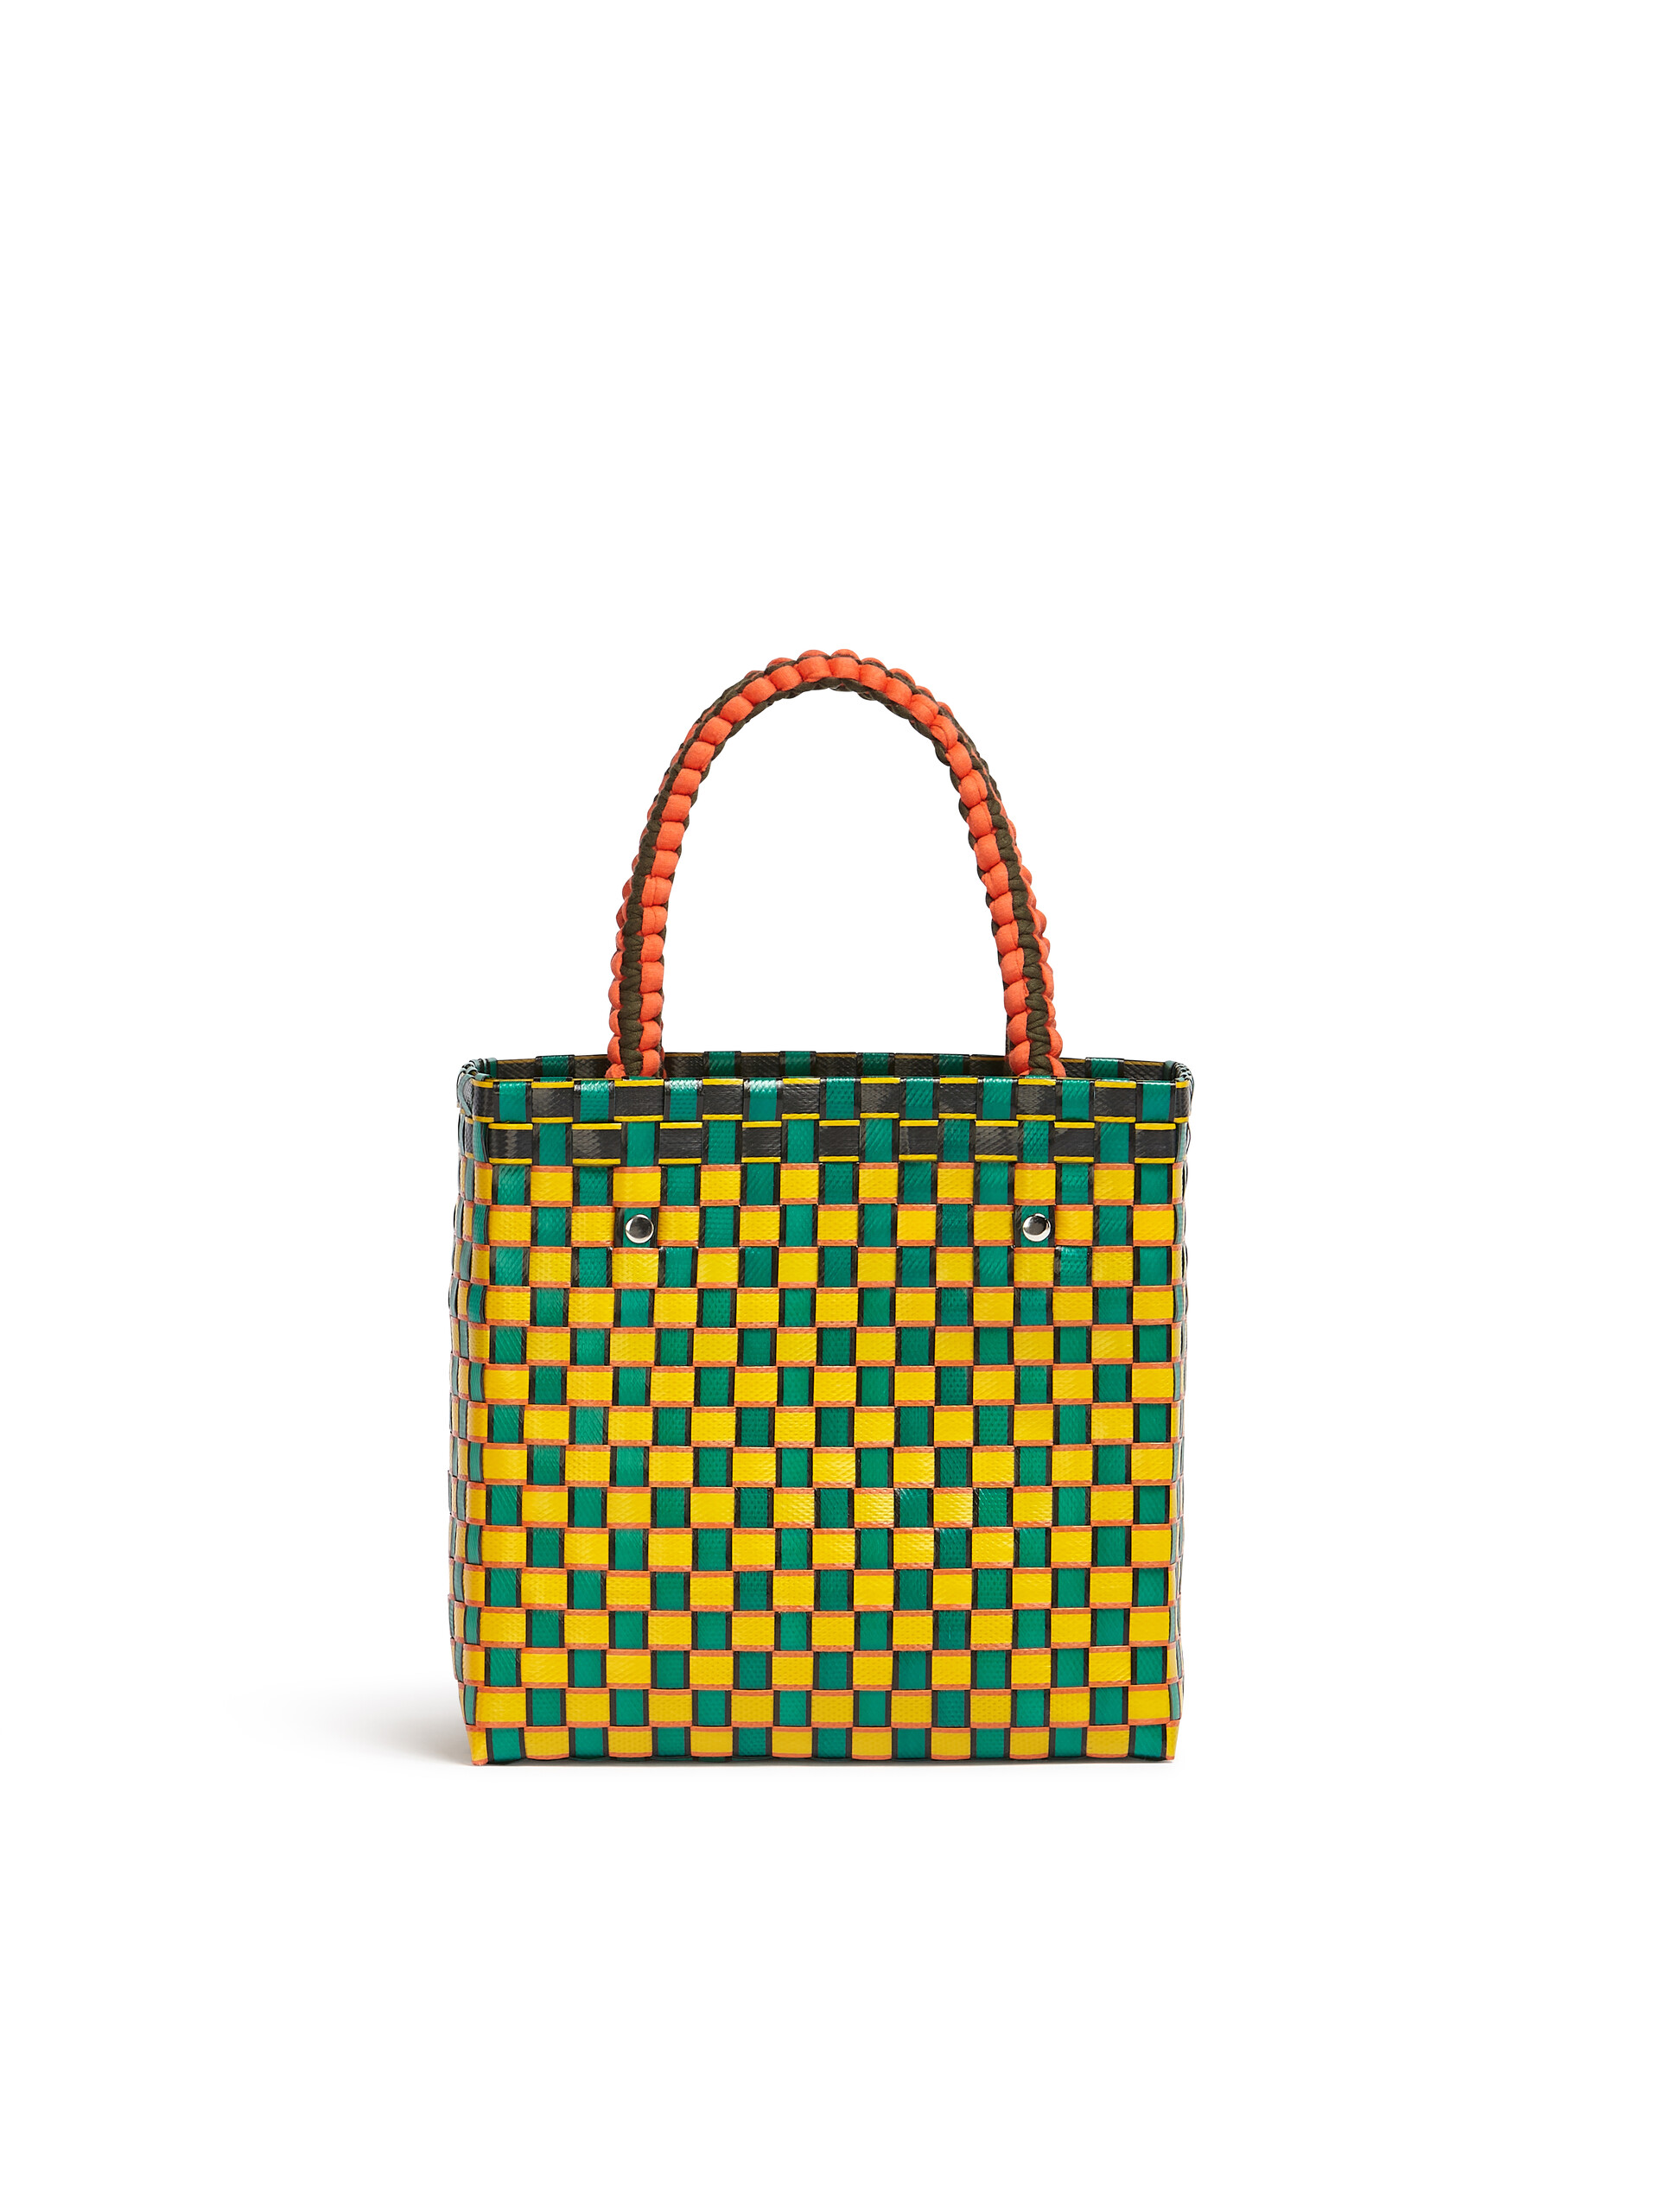 MARNI MARKET BASKET bag in yellow square woven material - Bags - Image 3